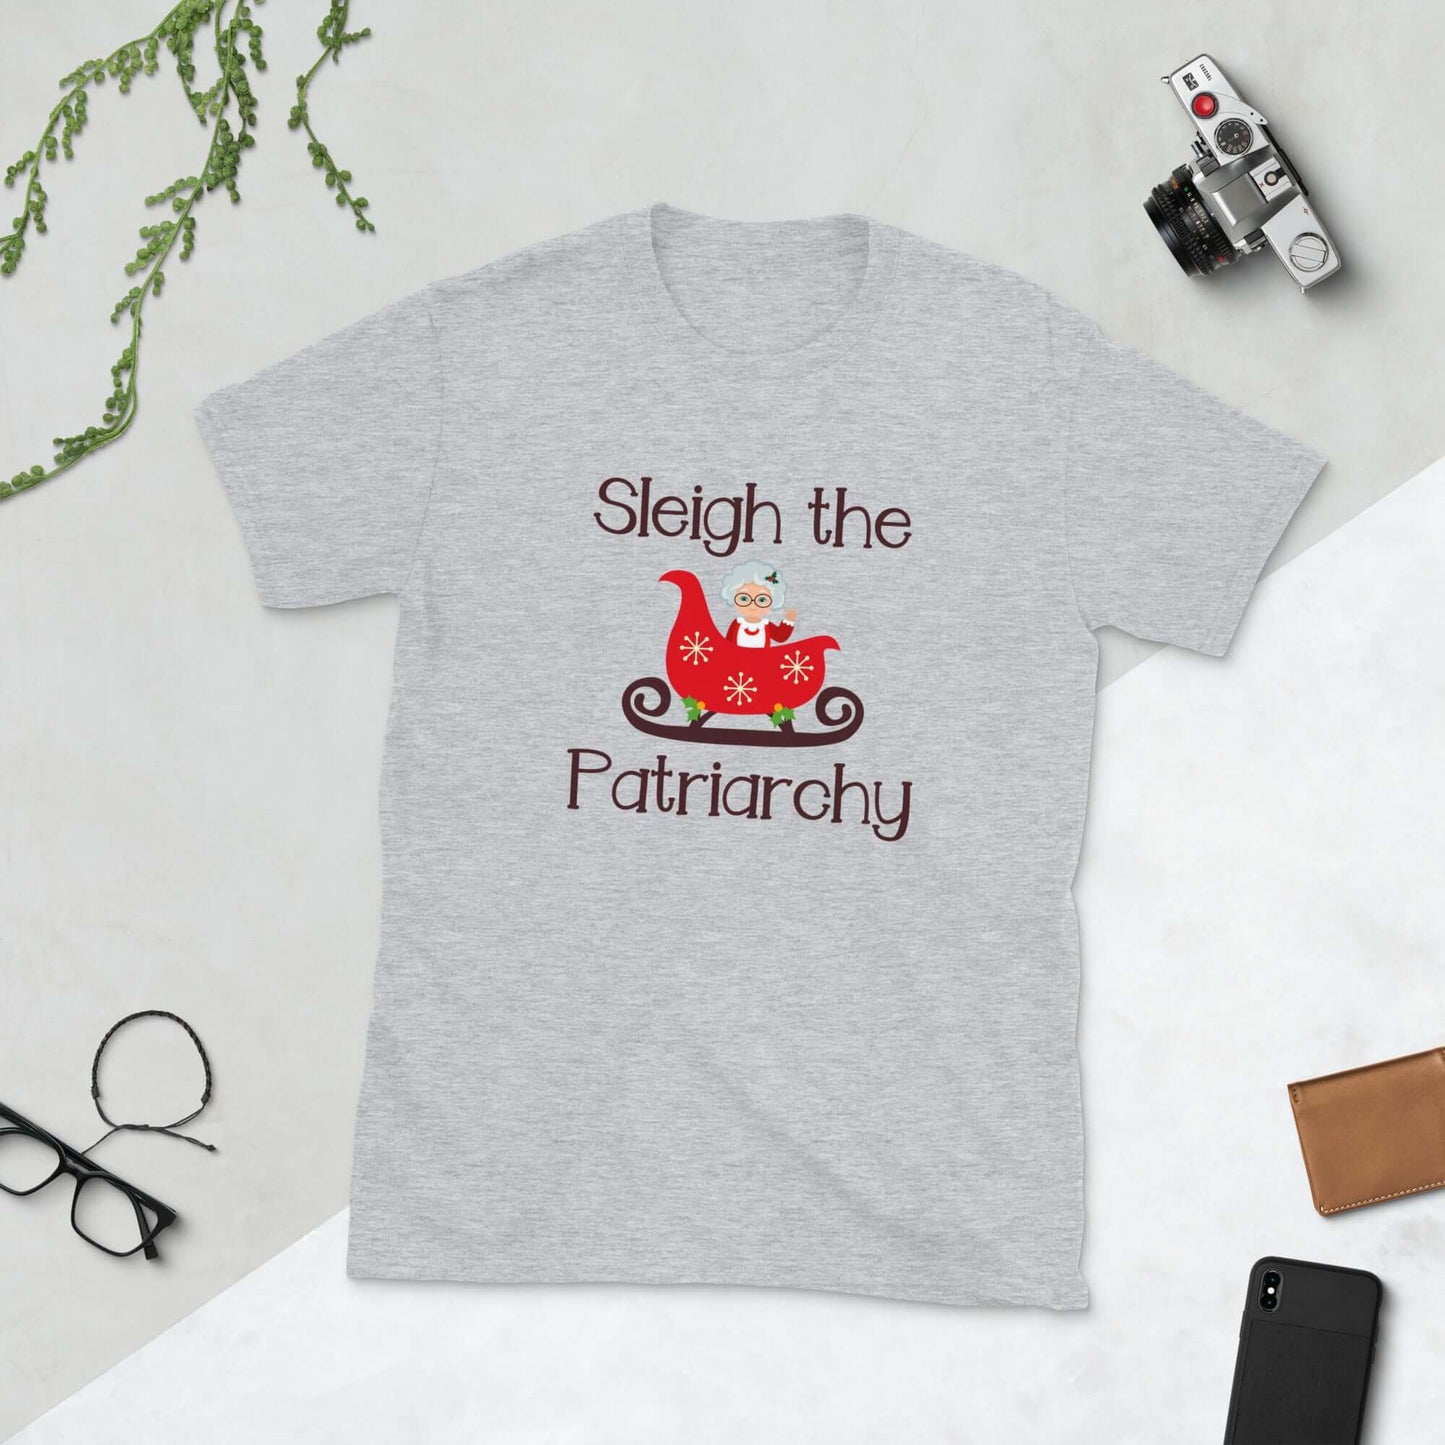 Sleigh the patriarchy Mrs. Claus t-shirt